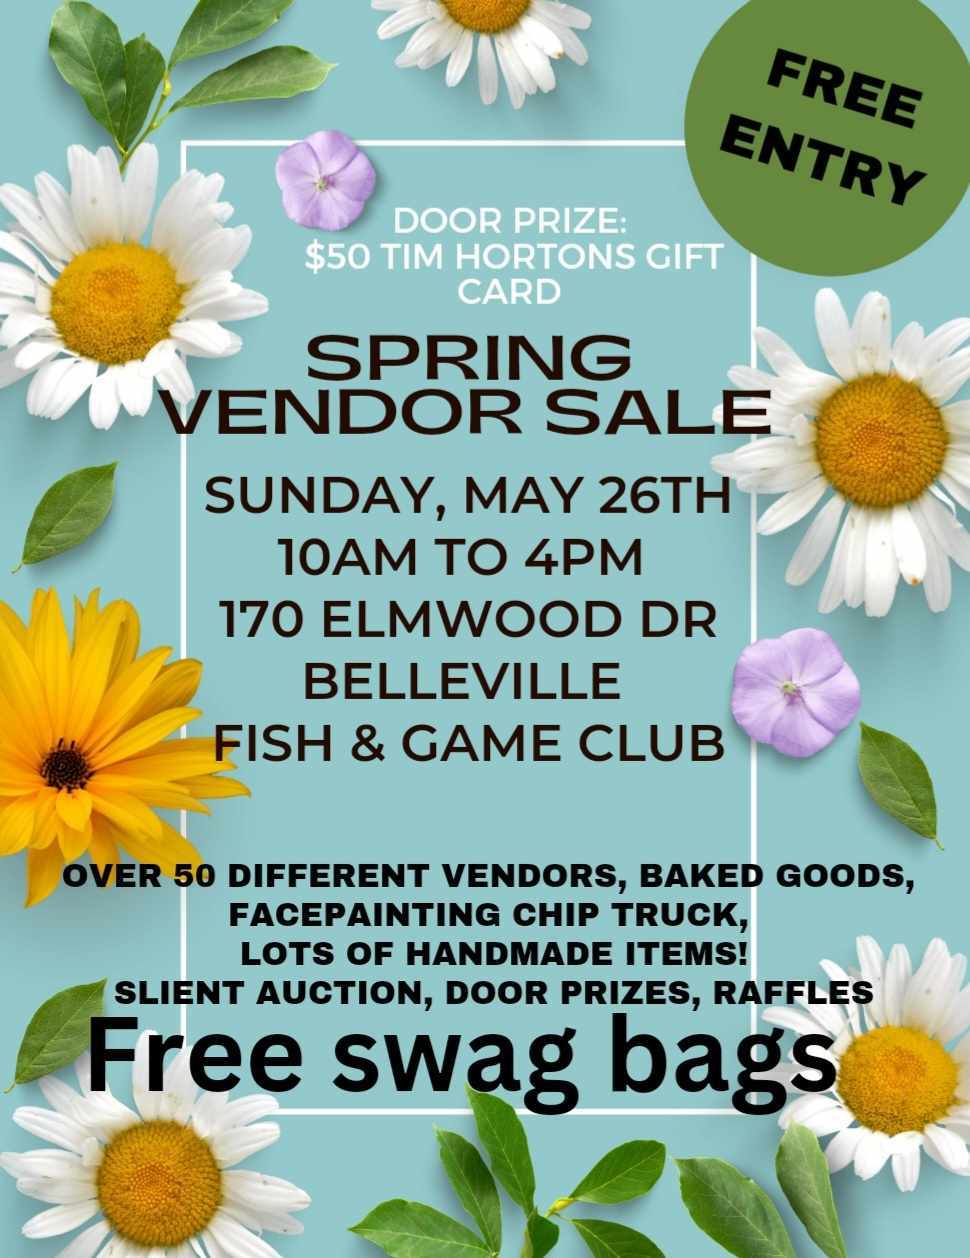 Poster titled "Spring Vendor Sale" with event details and photos of flowers.